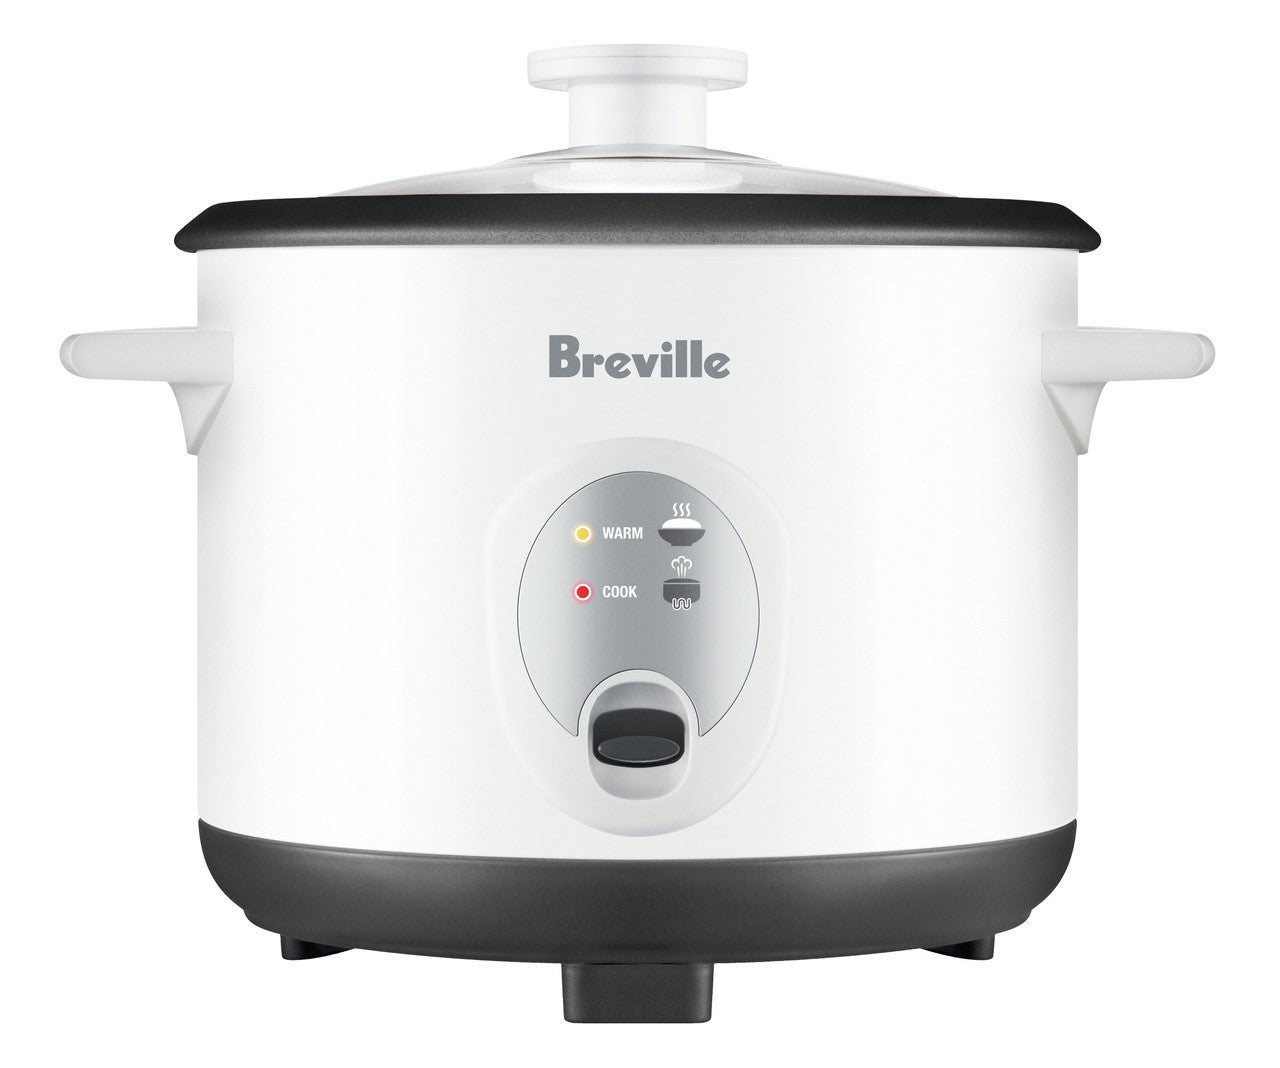 Breville Slow Cooker Review - HubPages